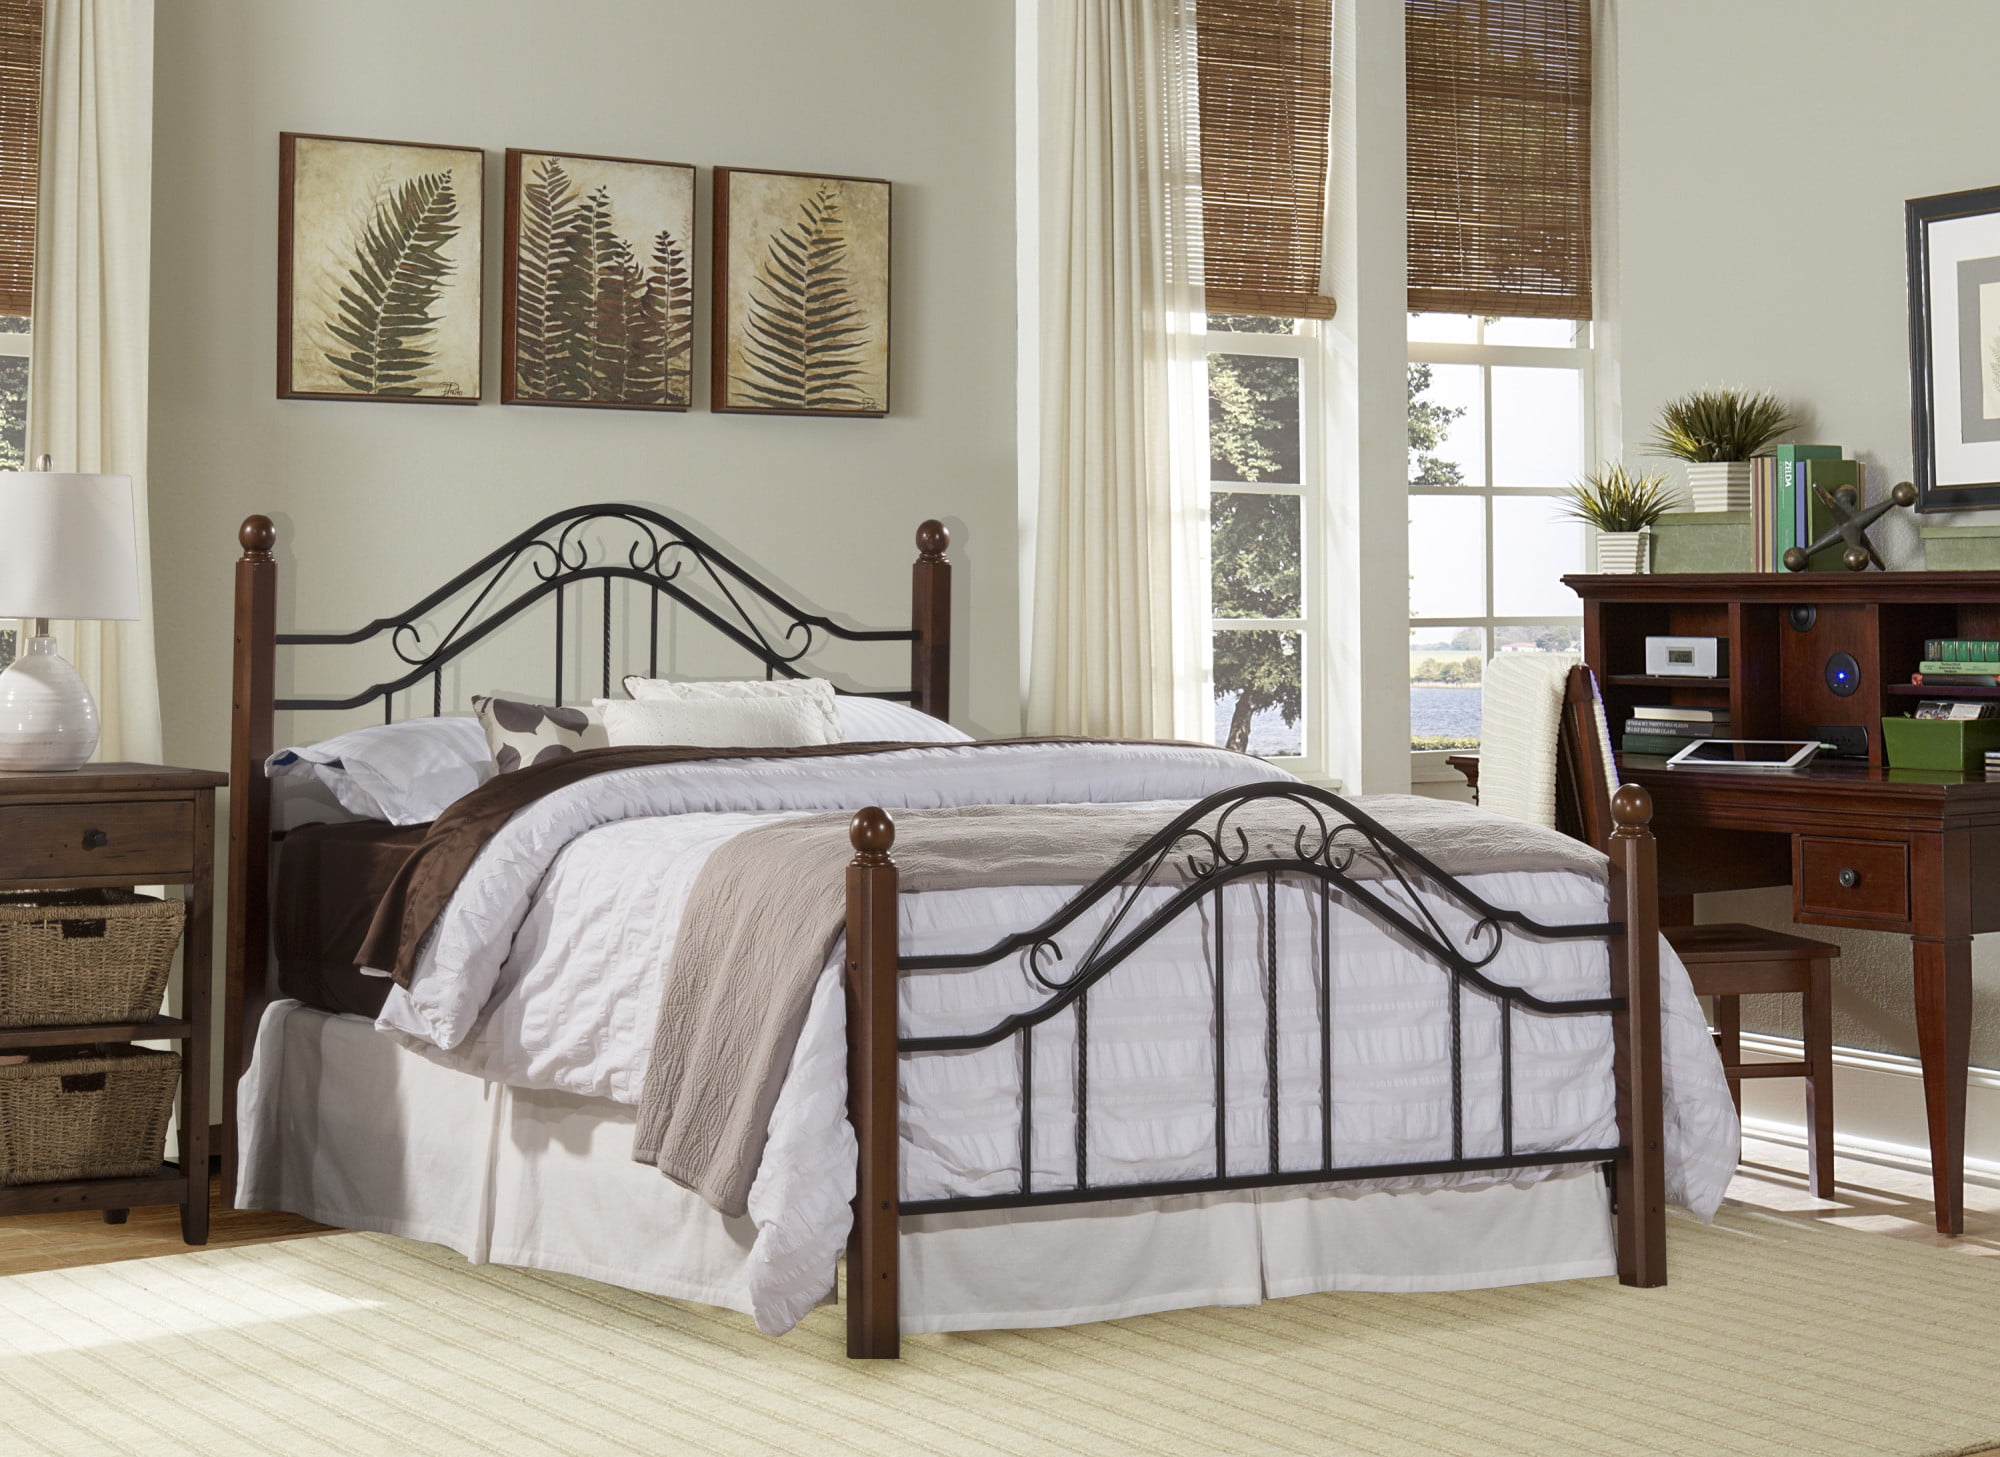 Hillsdale Furniture Madison Textured Black Metal Queen Bed with Cherry